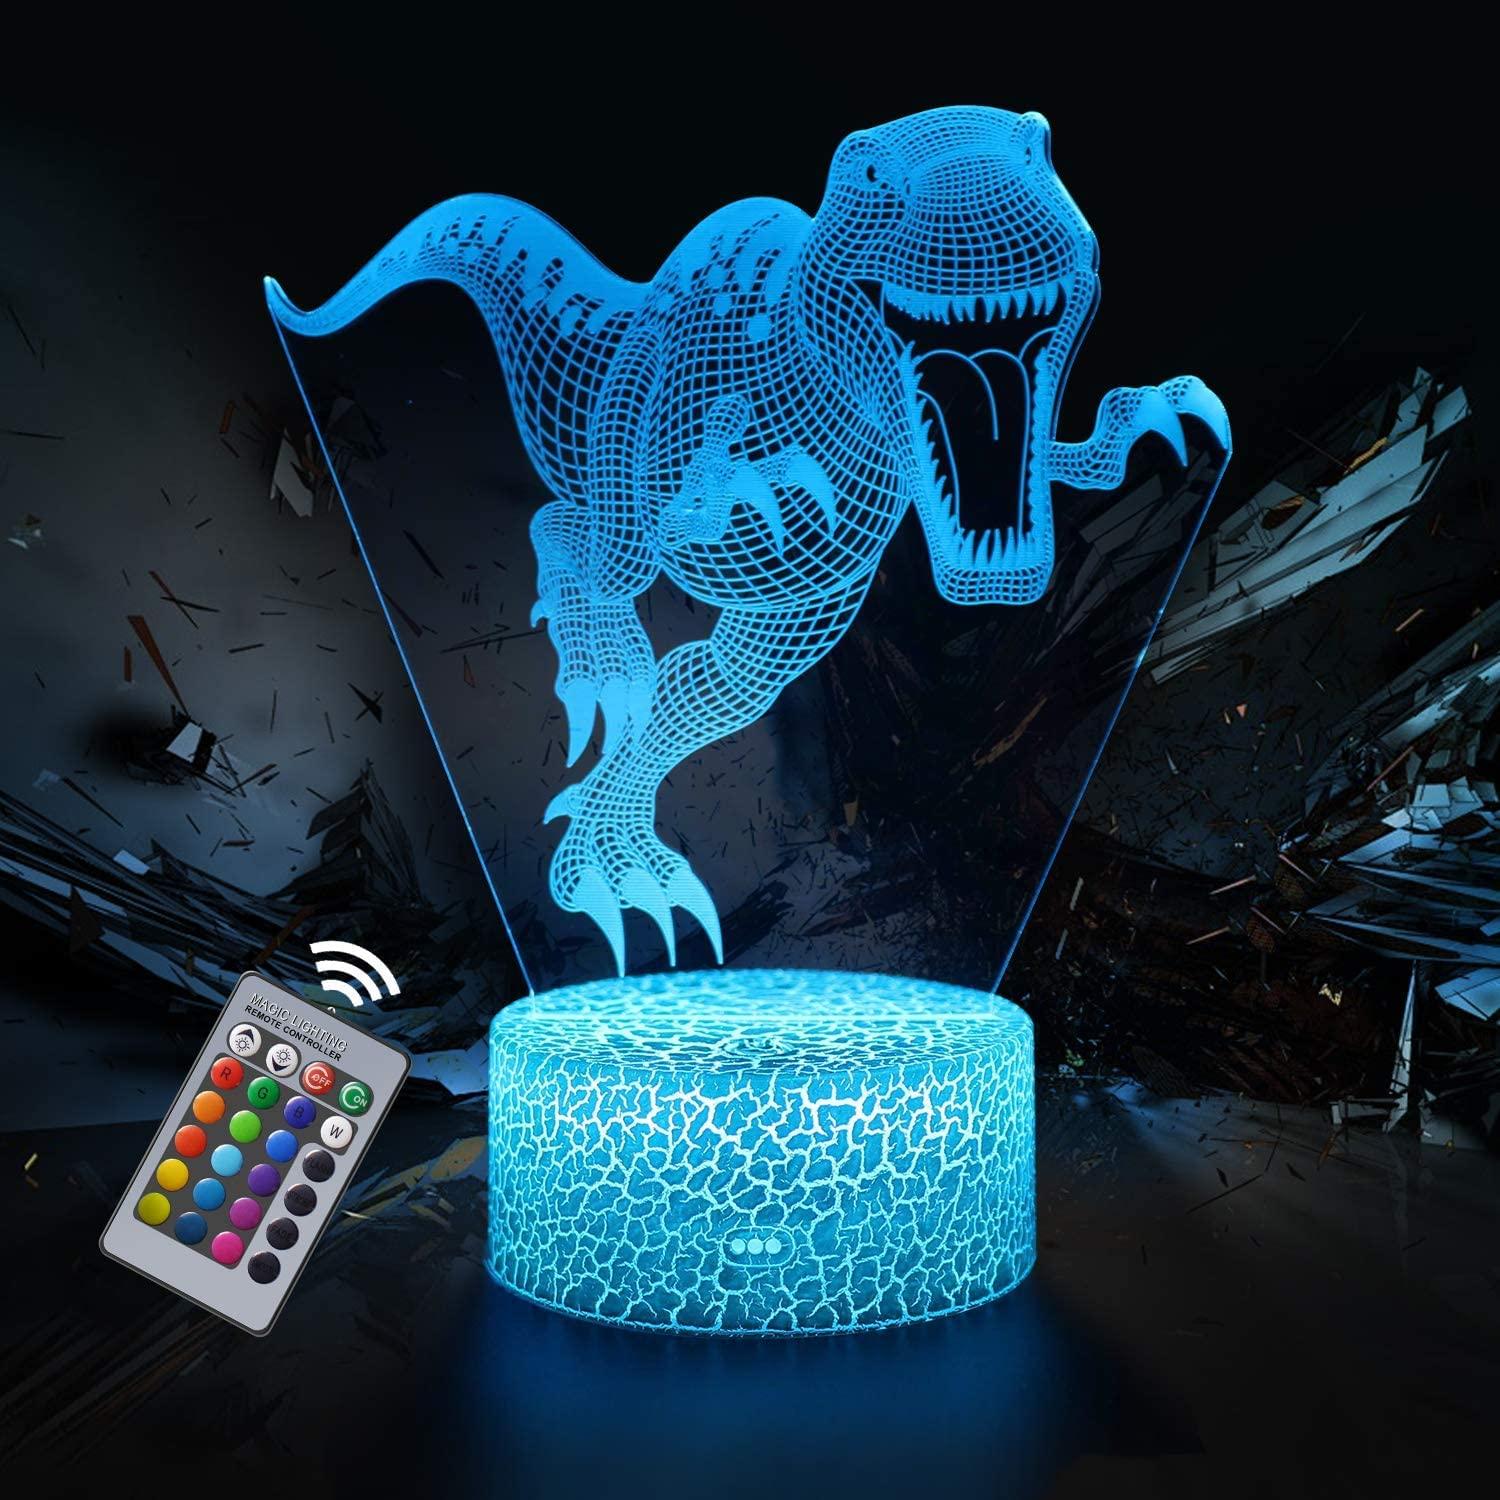 Dinosaur Night Light for Kids, Dinosaur Toys for Boys, 3D Optical Illusion Lamp, 16 Colour Changing Night Lamp with Remote Control Bedside Lamp, Birthday Gifts for Children and Adult